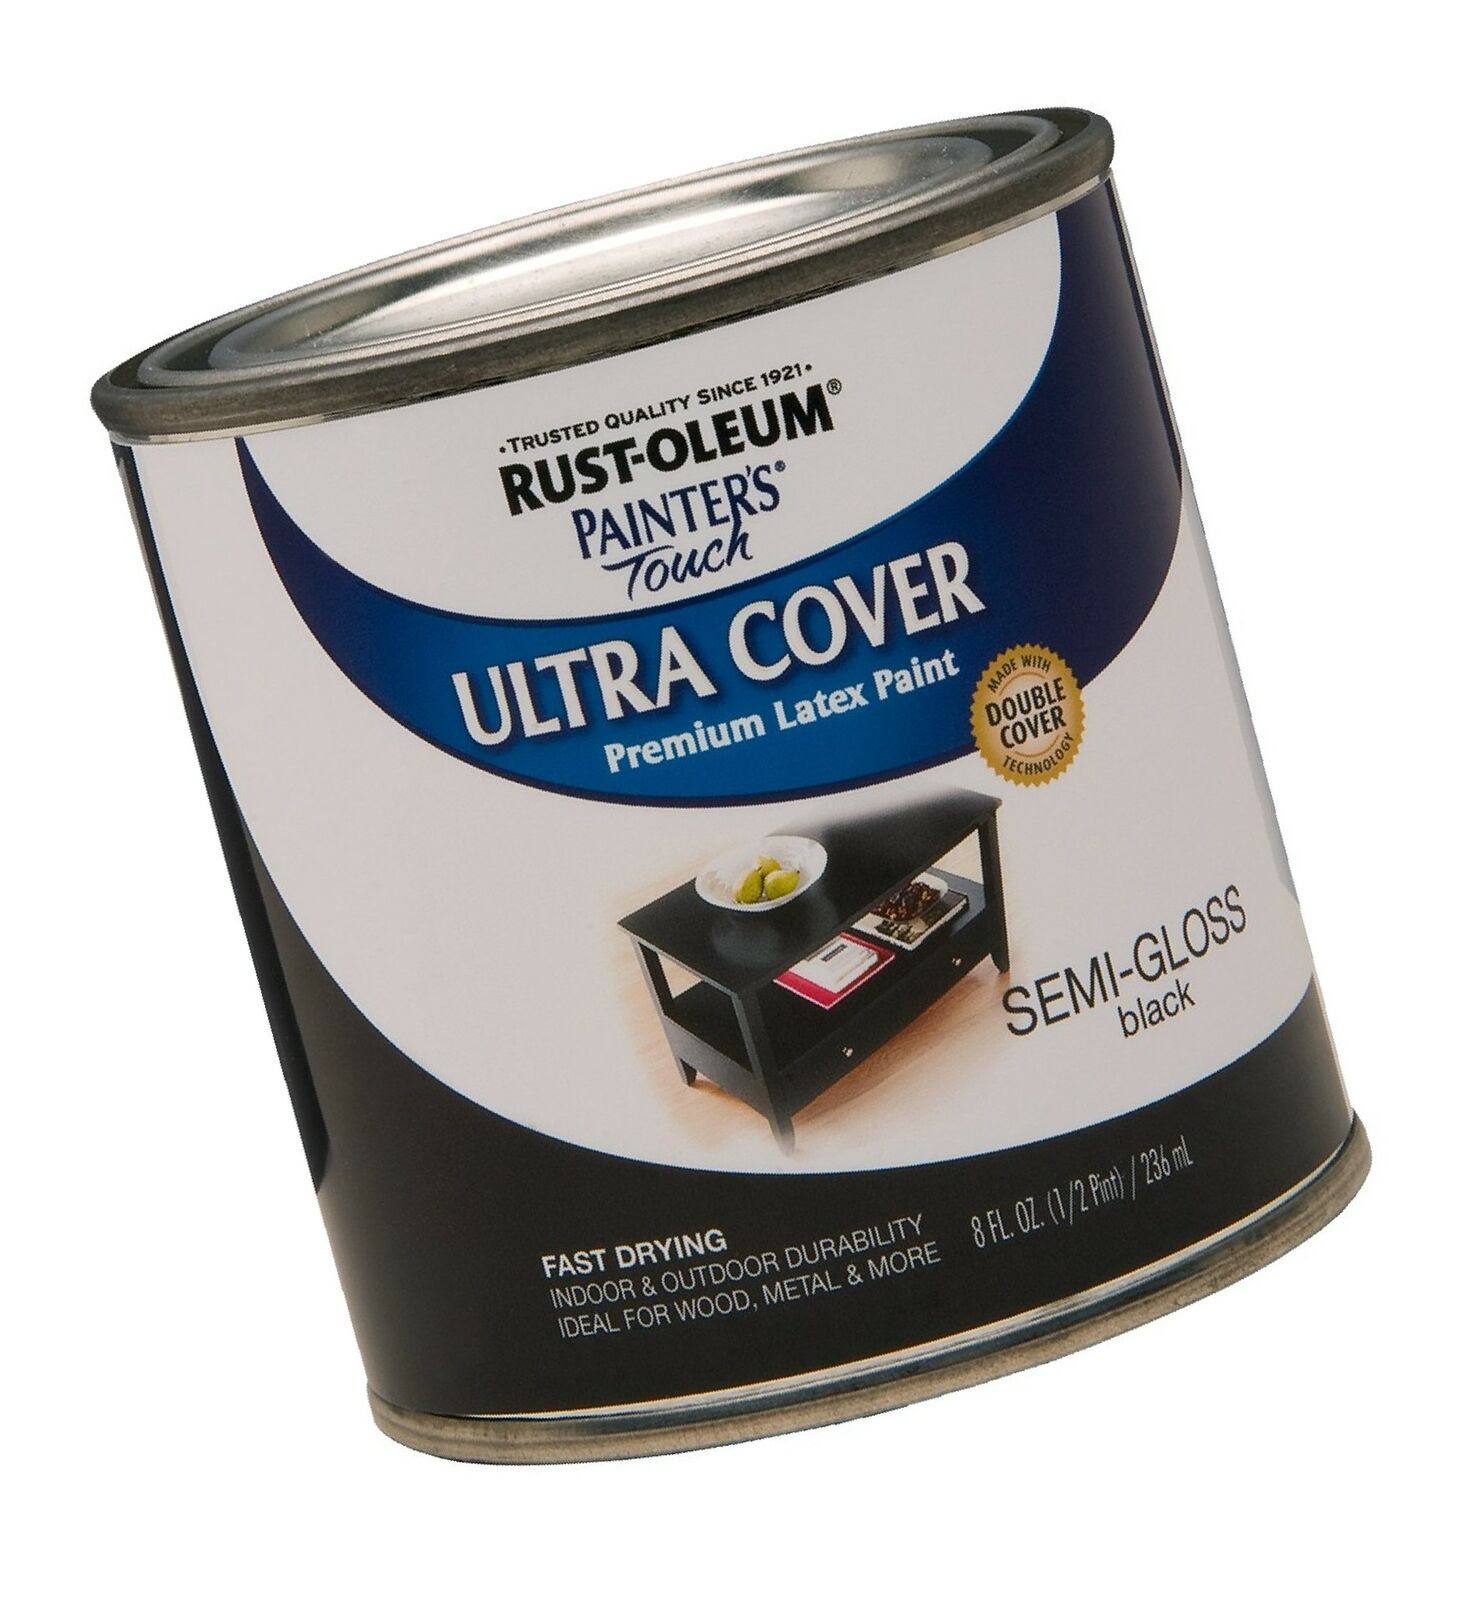 Rustoleum High Heat Paint Awesome Rust Oleum Painters touch Latex Semi Gloss Black 1 2 Pint